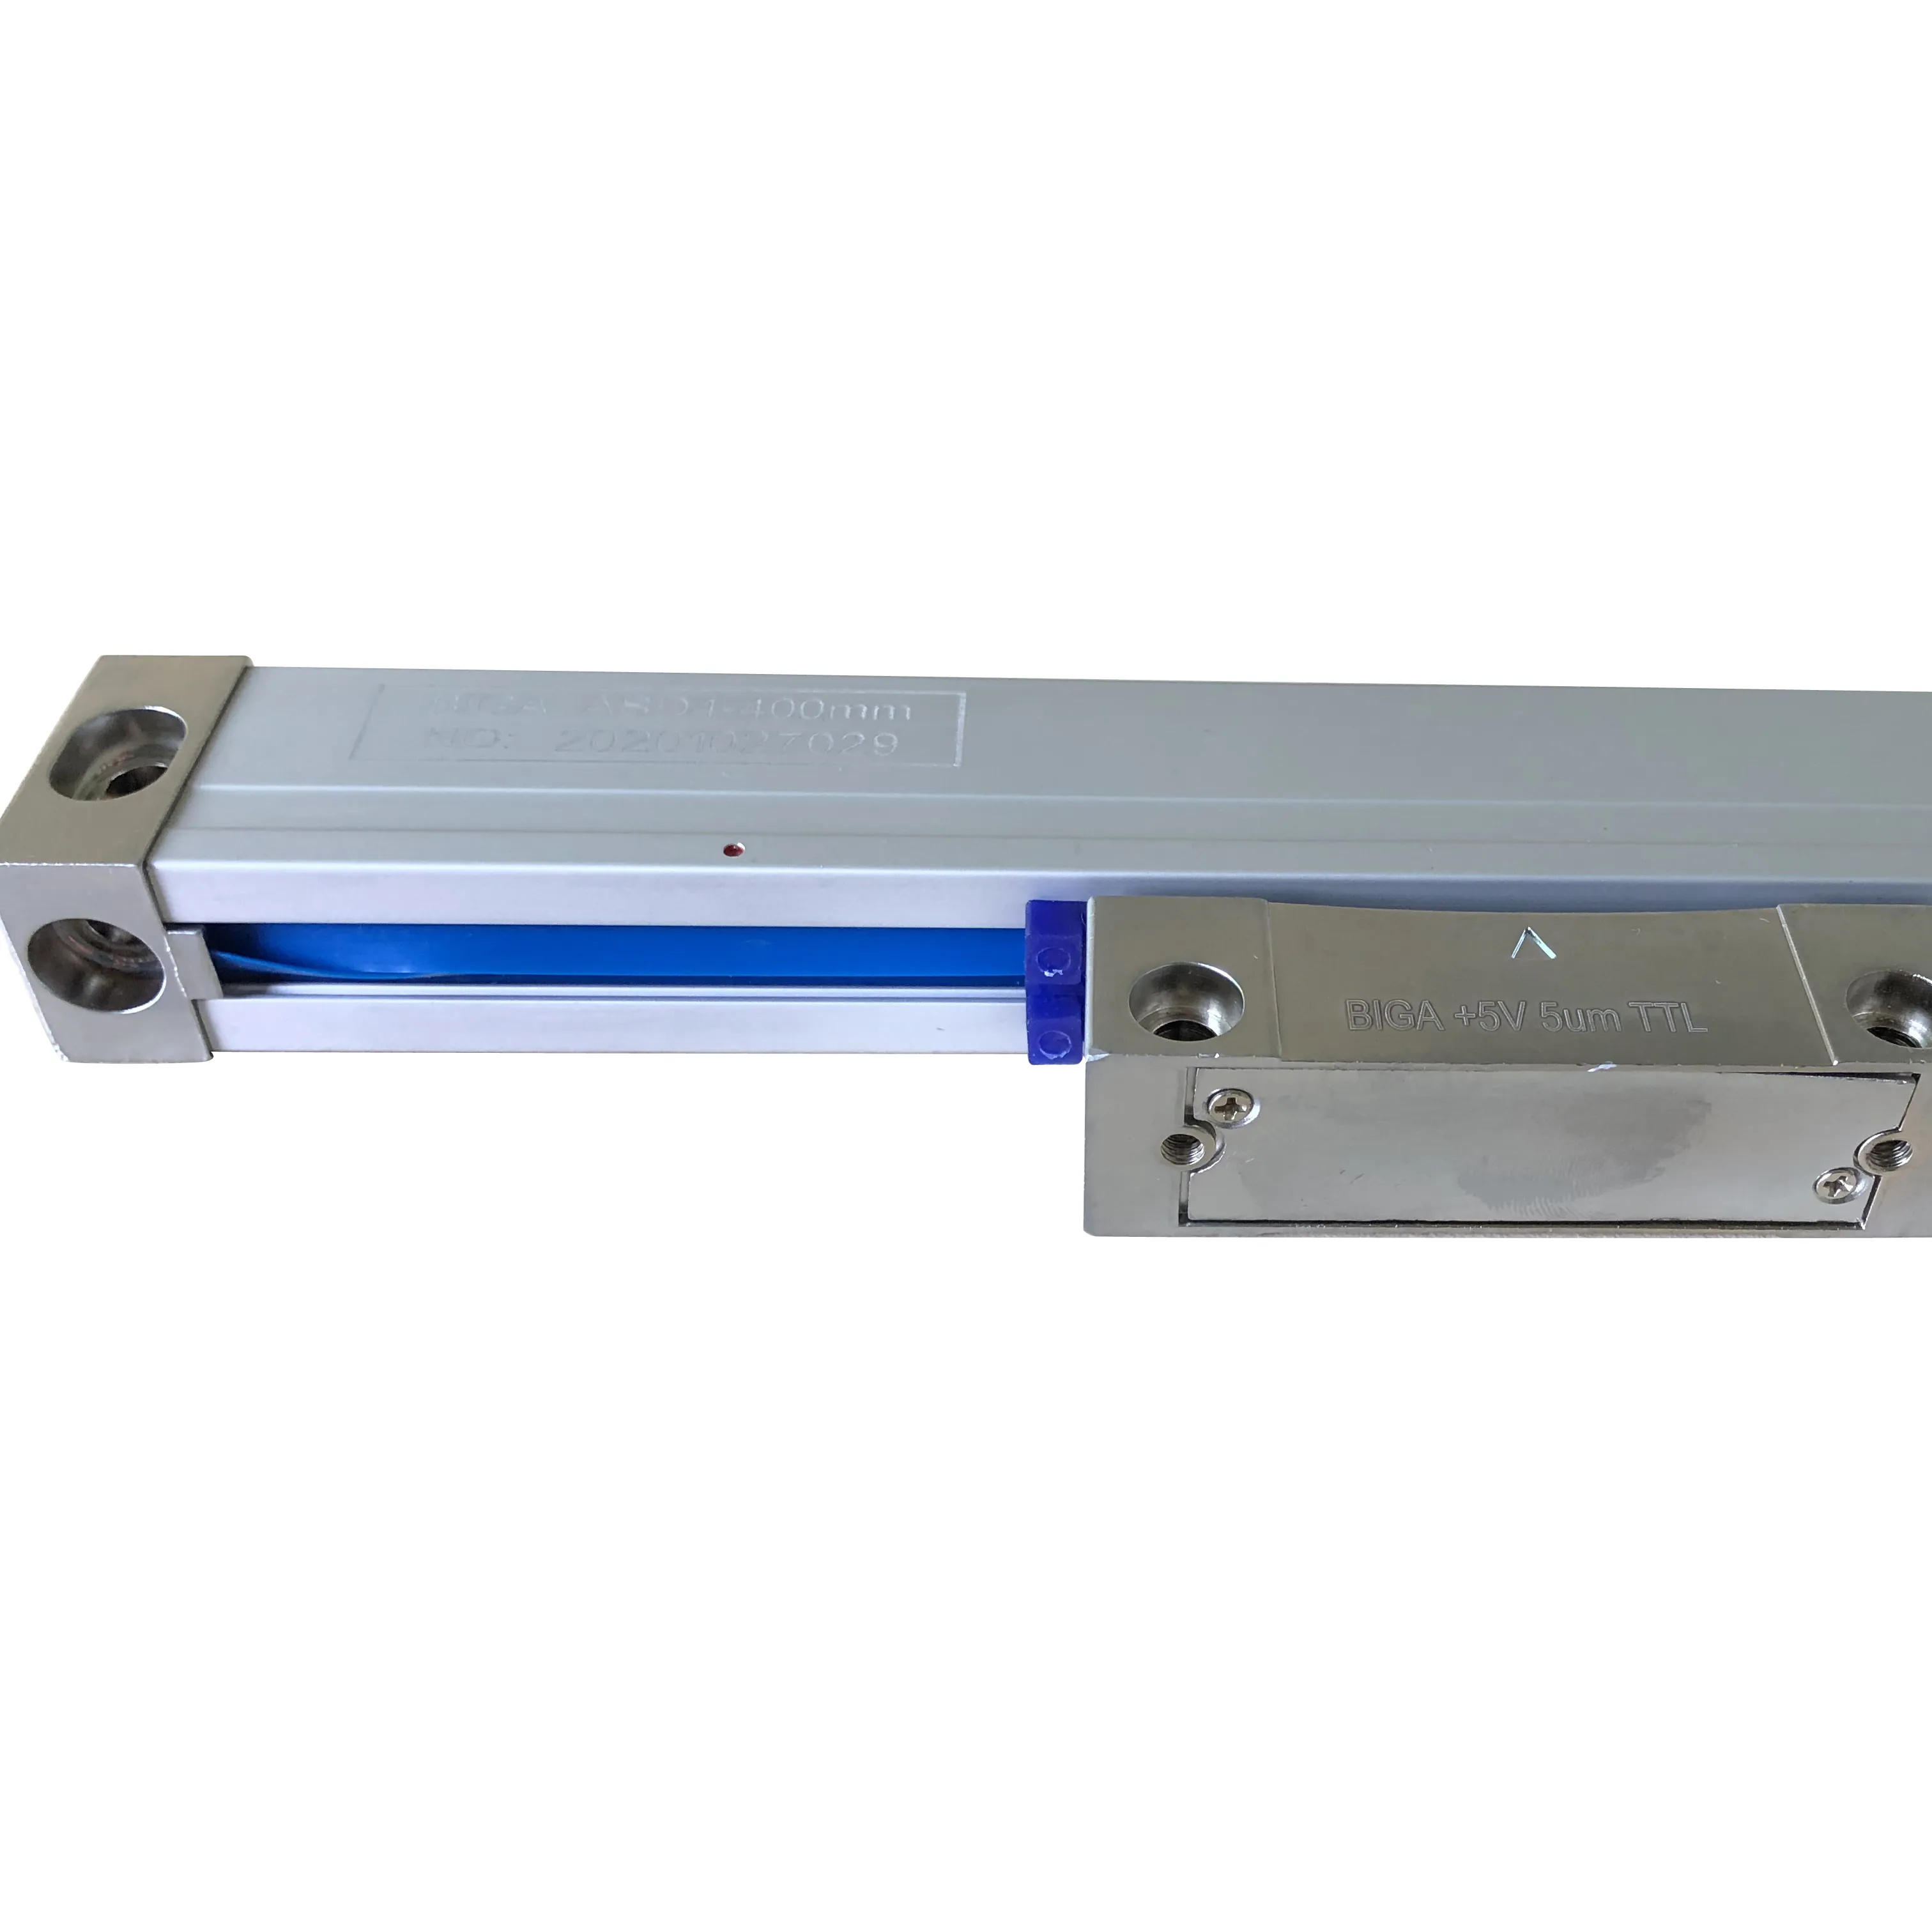 Optical Linear Scale Encoder With 5um Resolution & TTL Signal